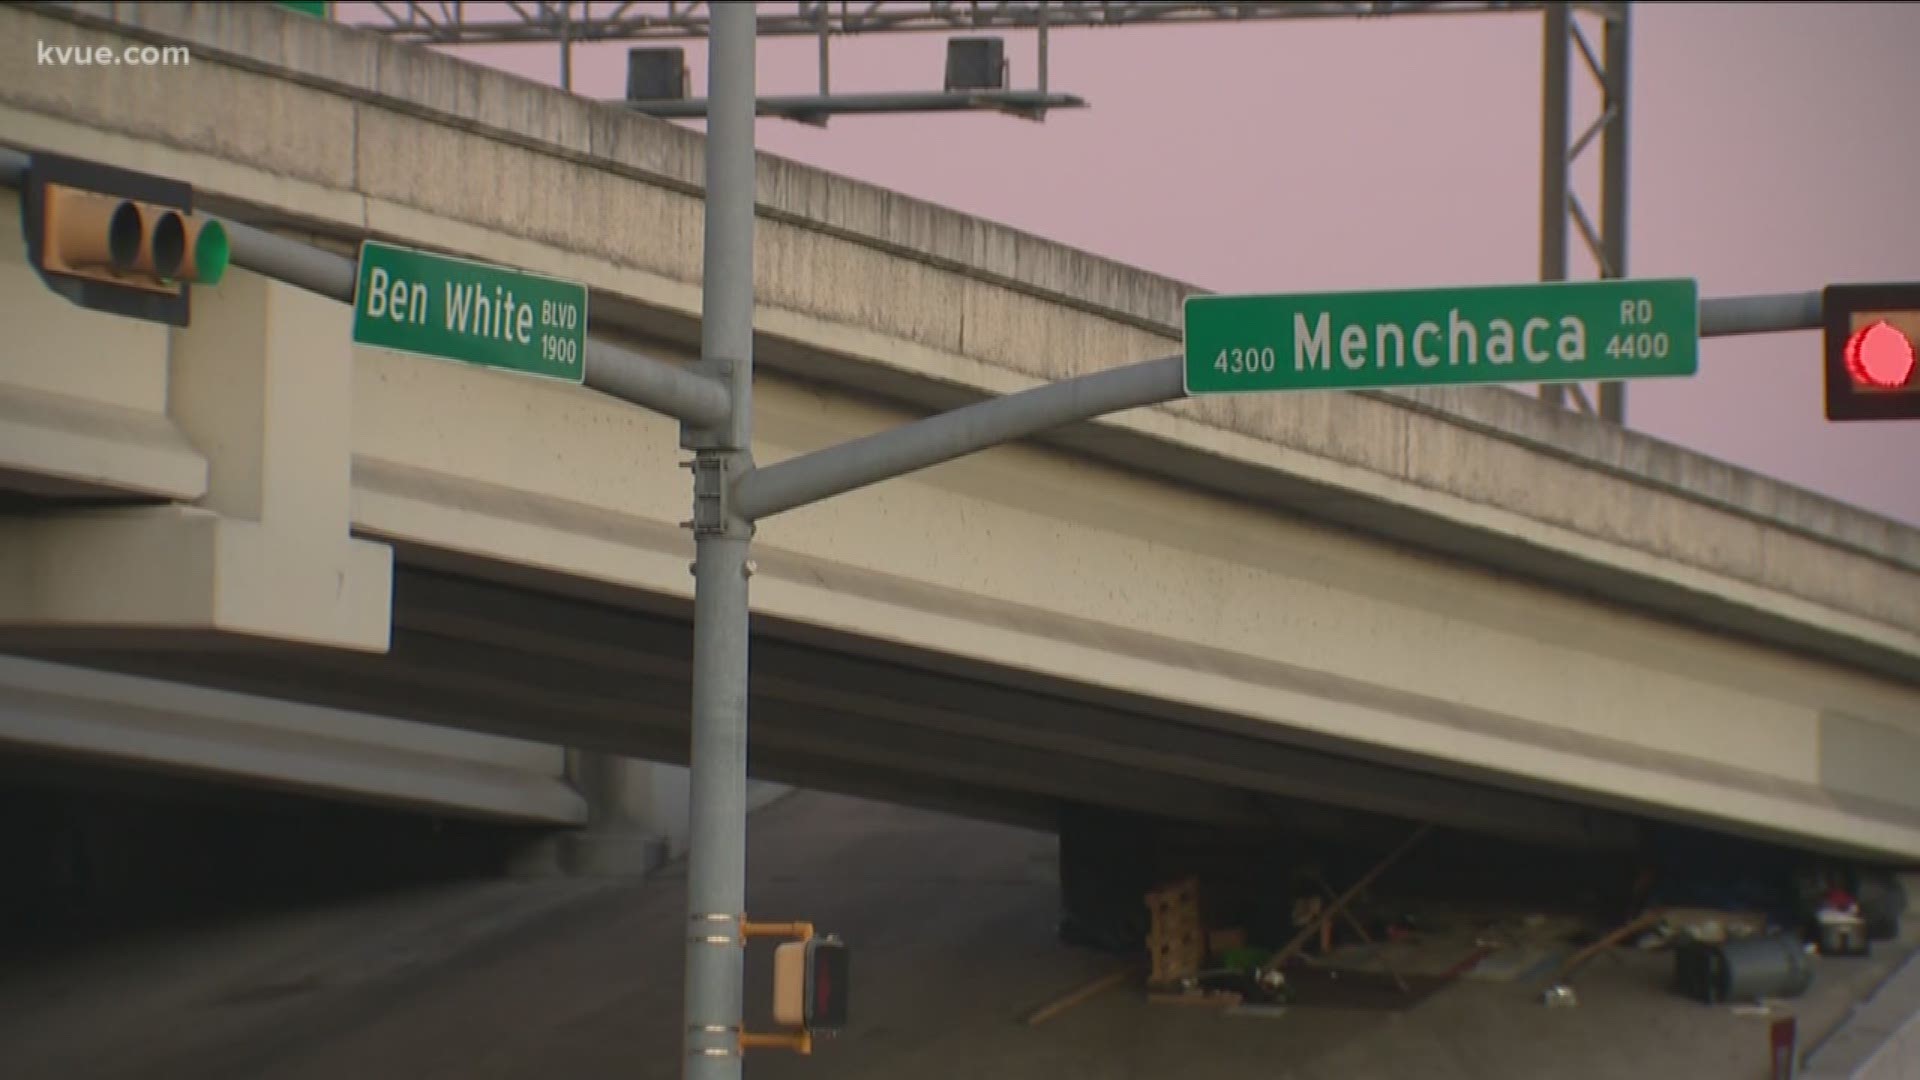 The transportation department said the costs are covered by the applicant for the street's name change.